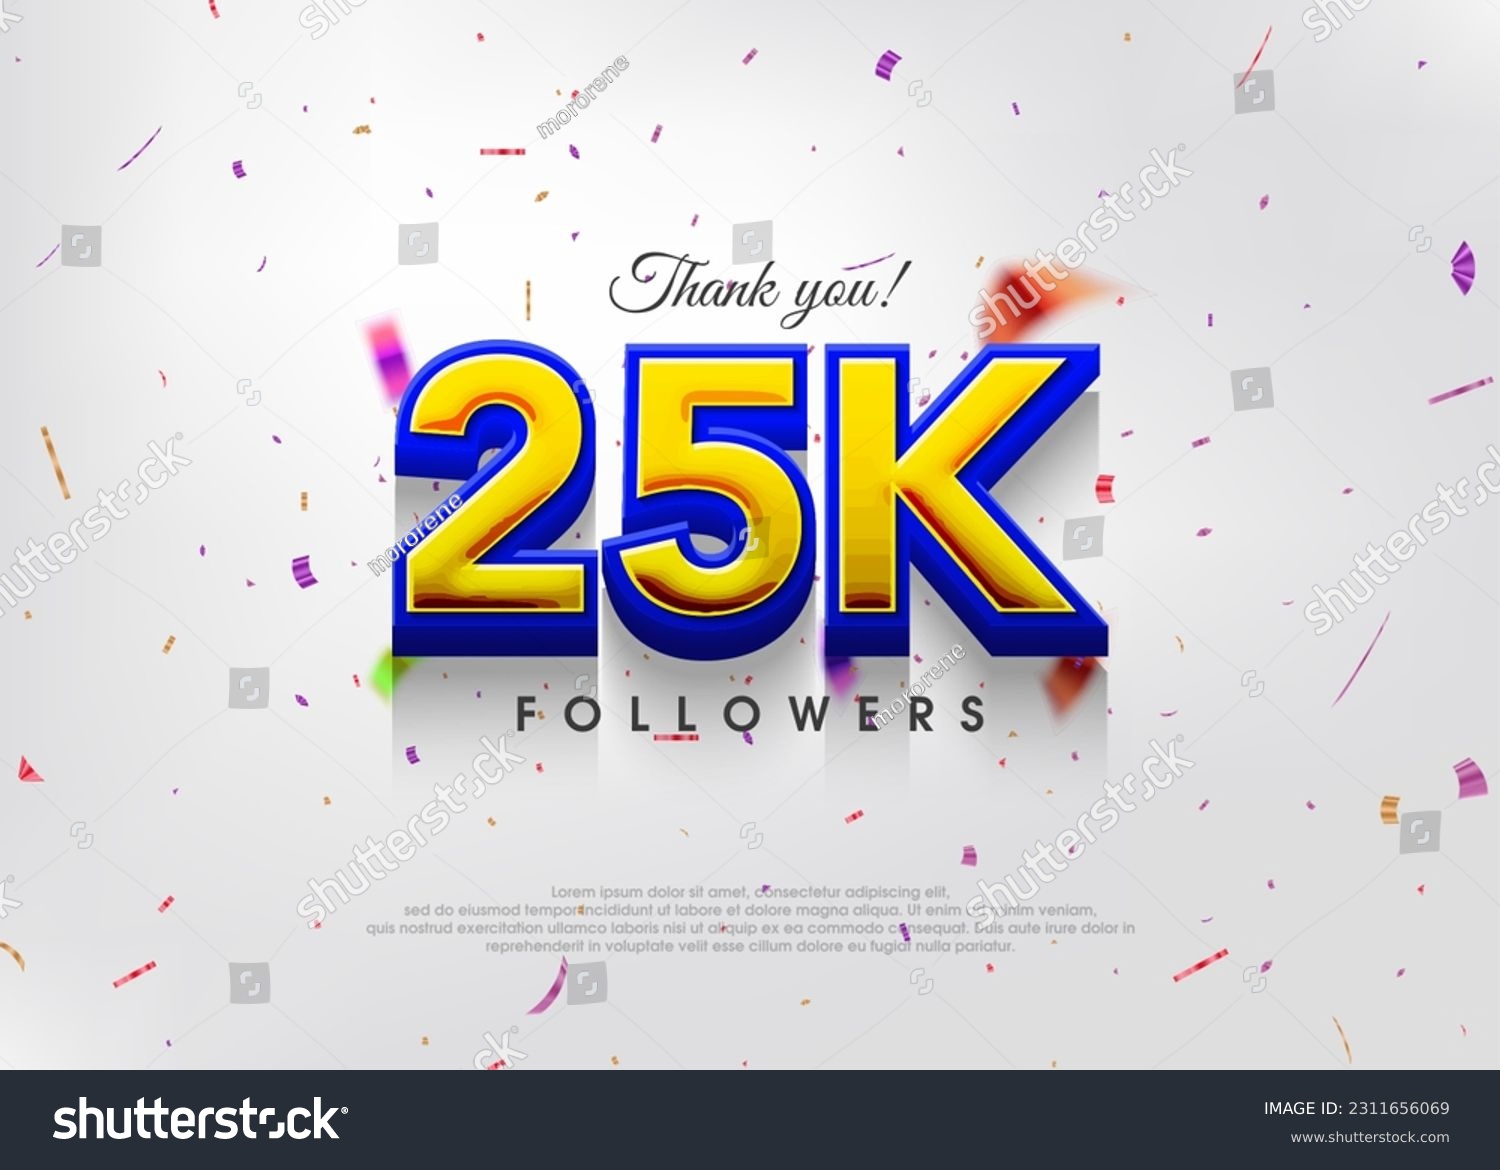 SVG of Colorful theme greeting 25k followers, thank you greetings for banners, posters and social media posts. svg